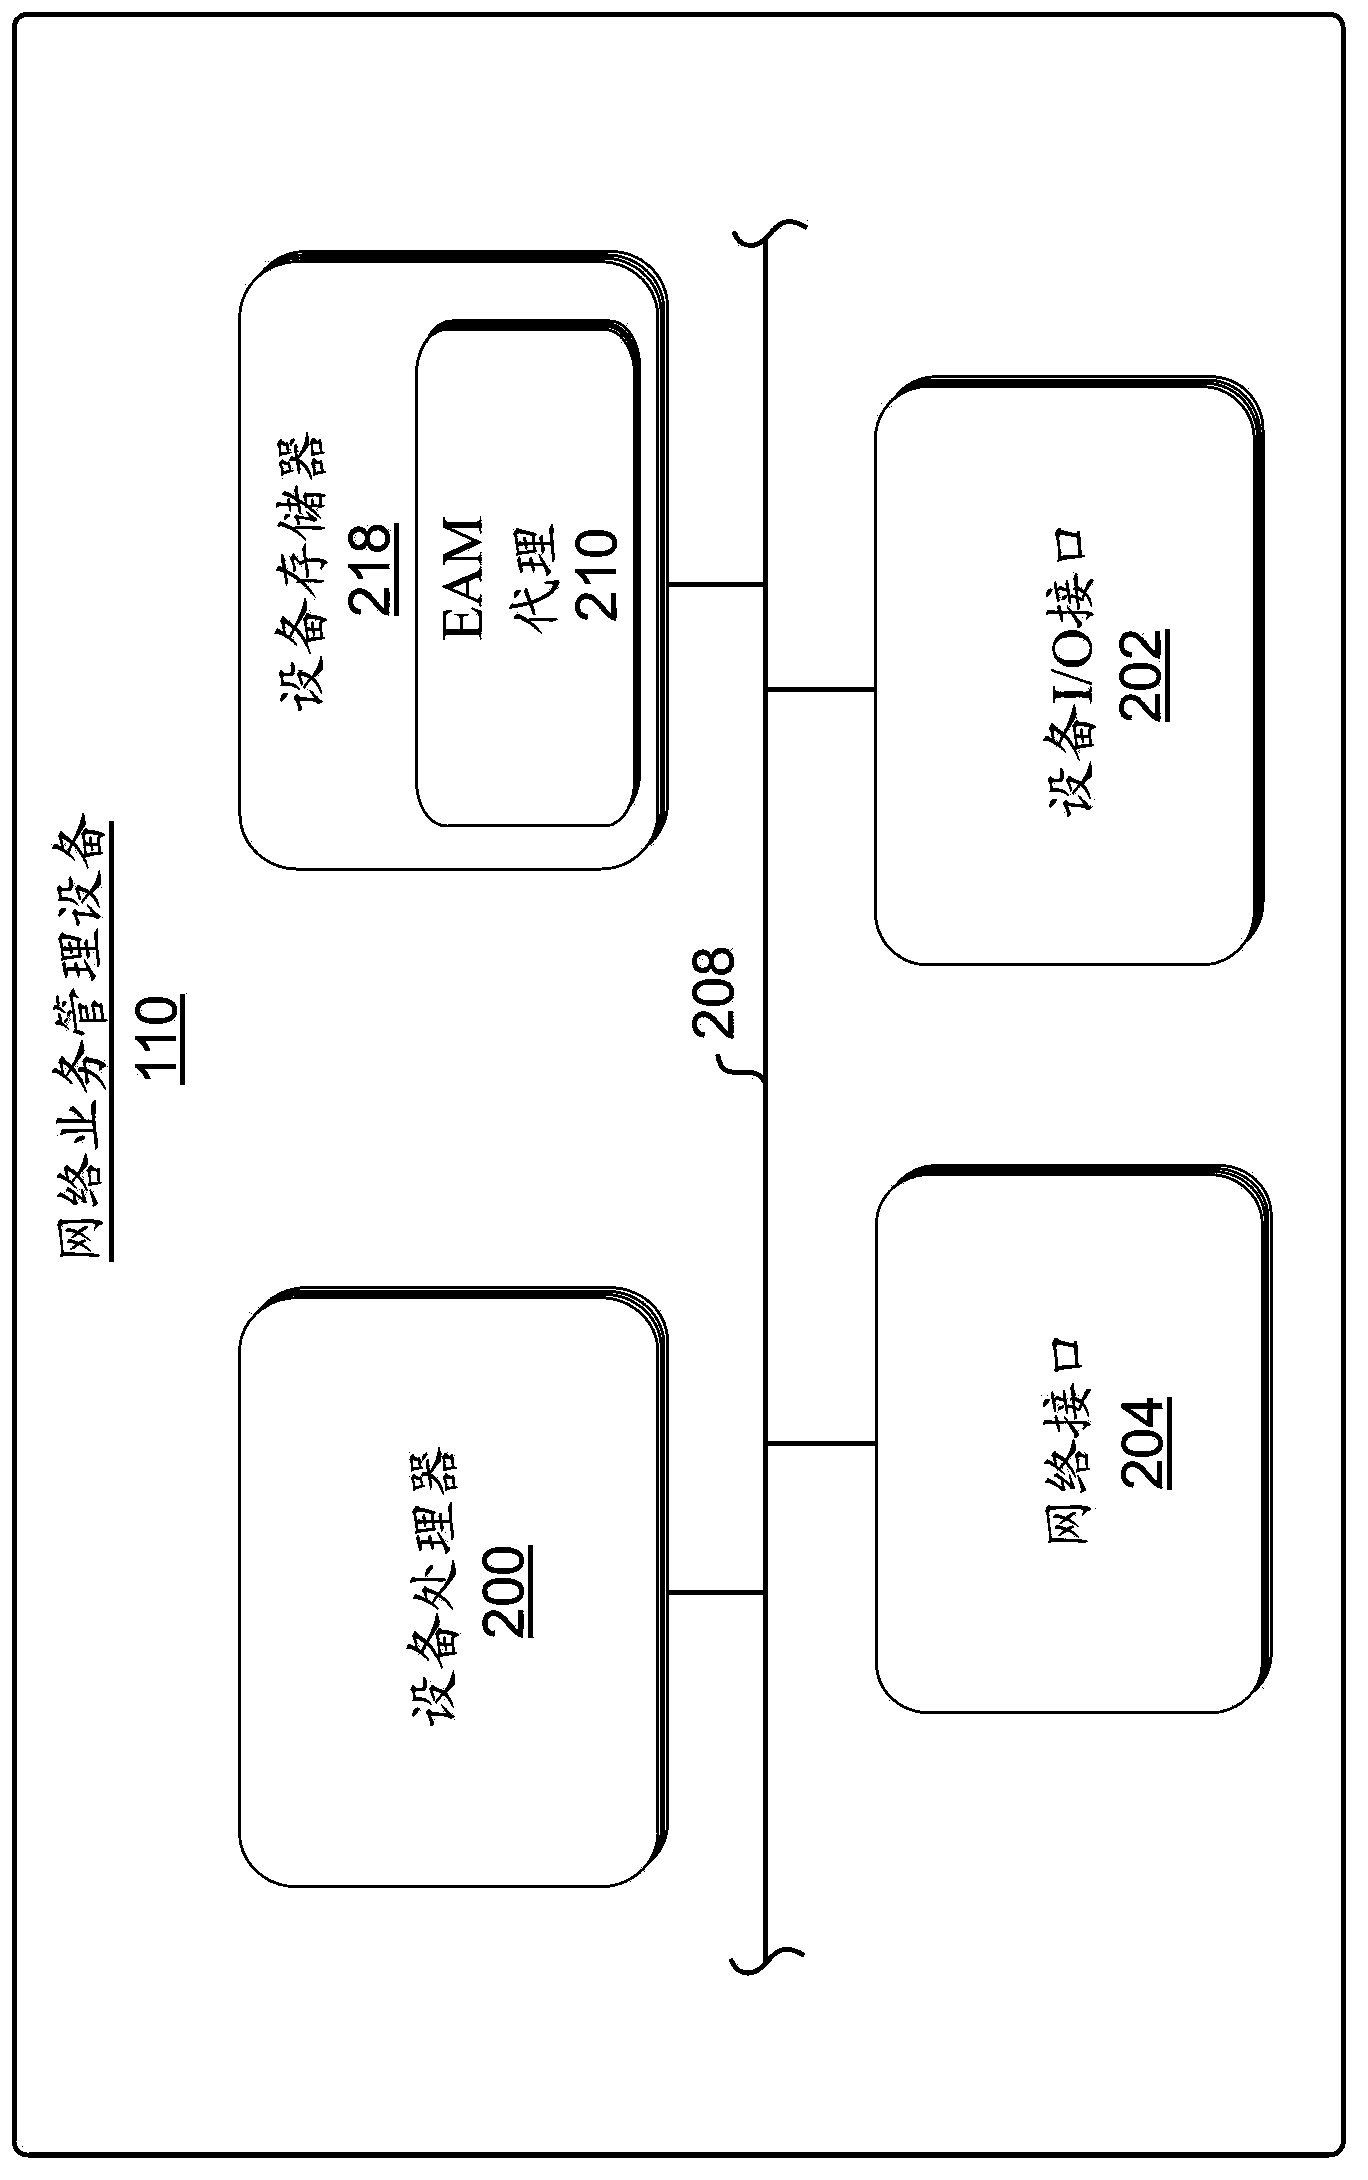 System and method for combining an access control system with a traffic management system